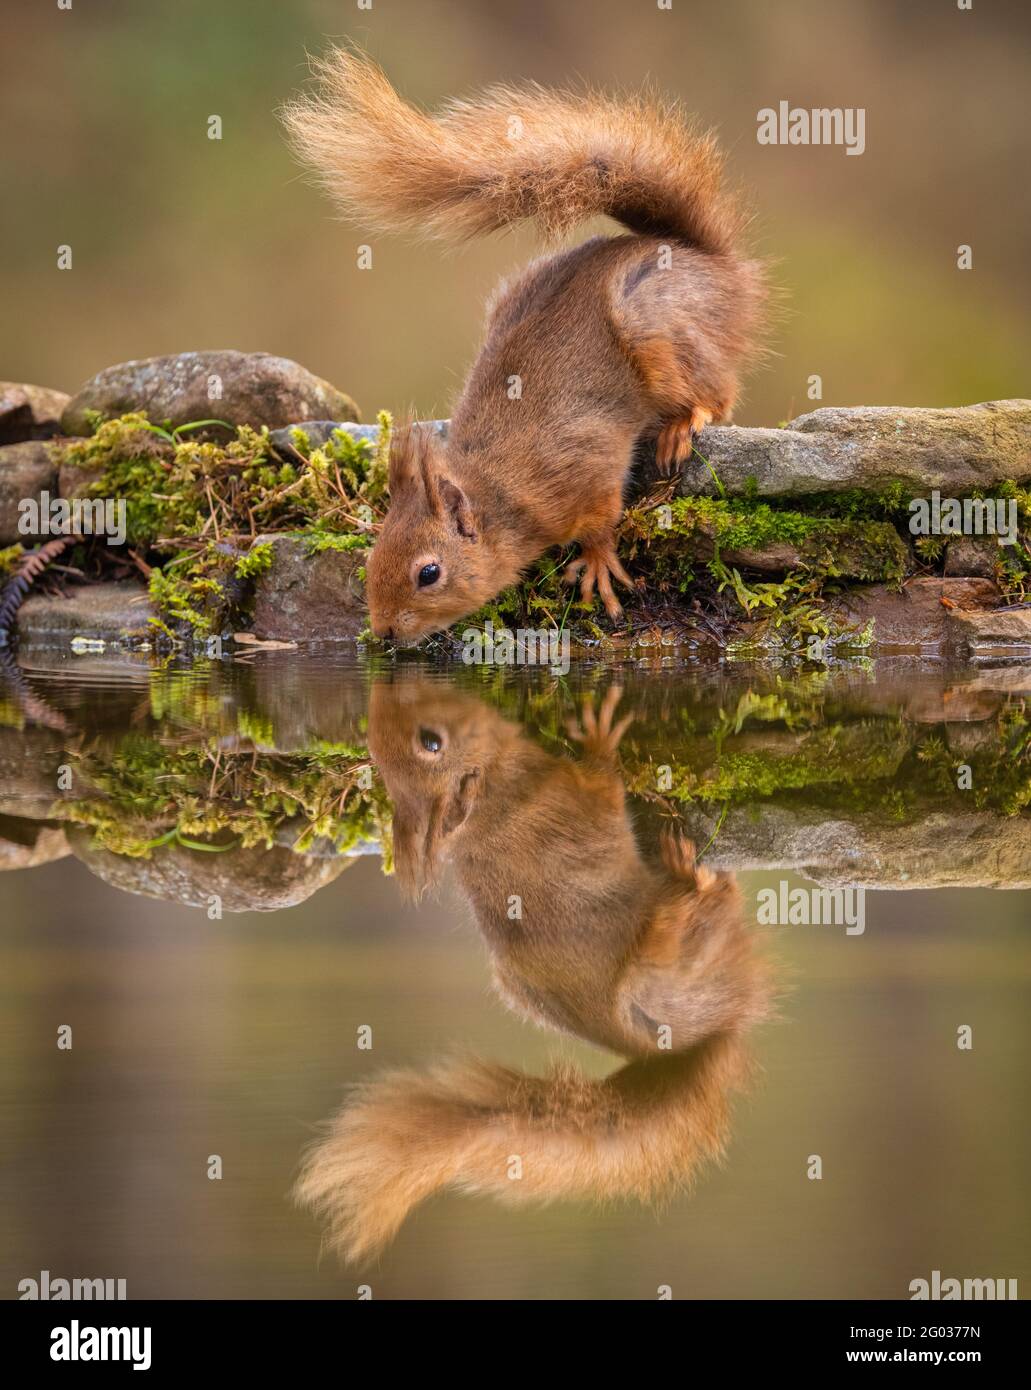 Red Squirrel in its natural habitat in Scotland Stock Photo